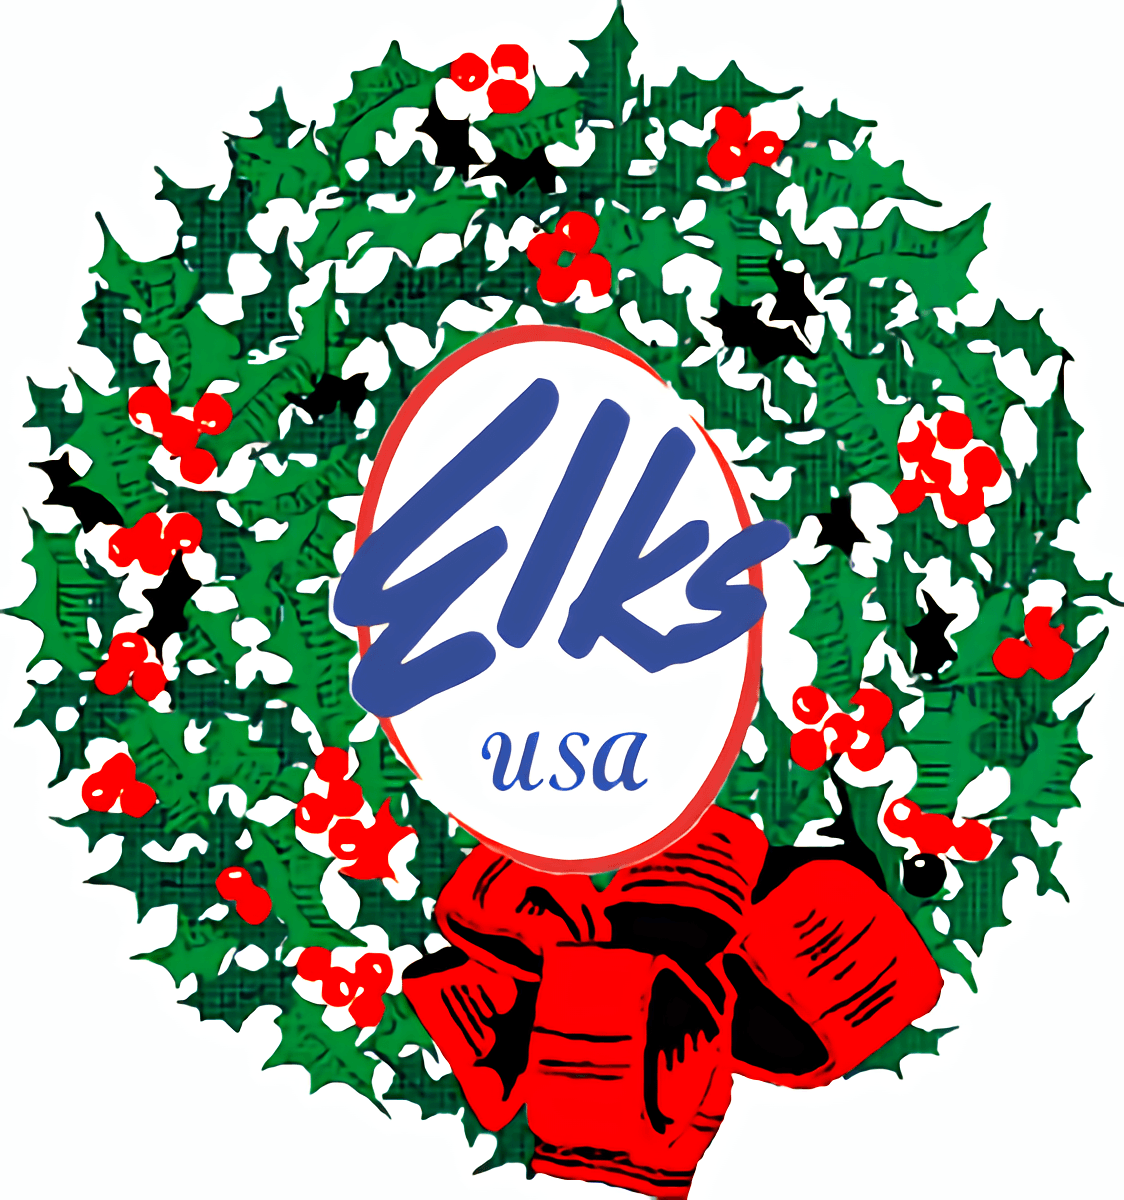 Merry Christmas from Elks #341!